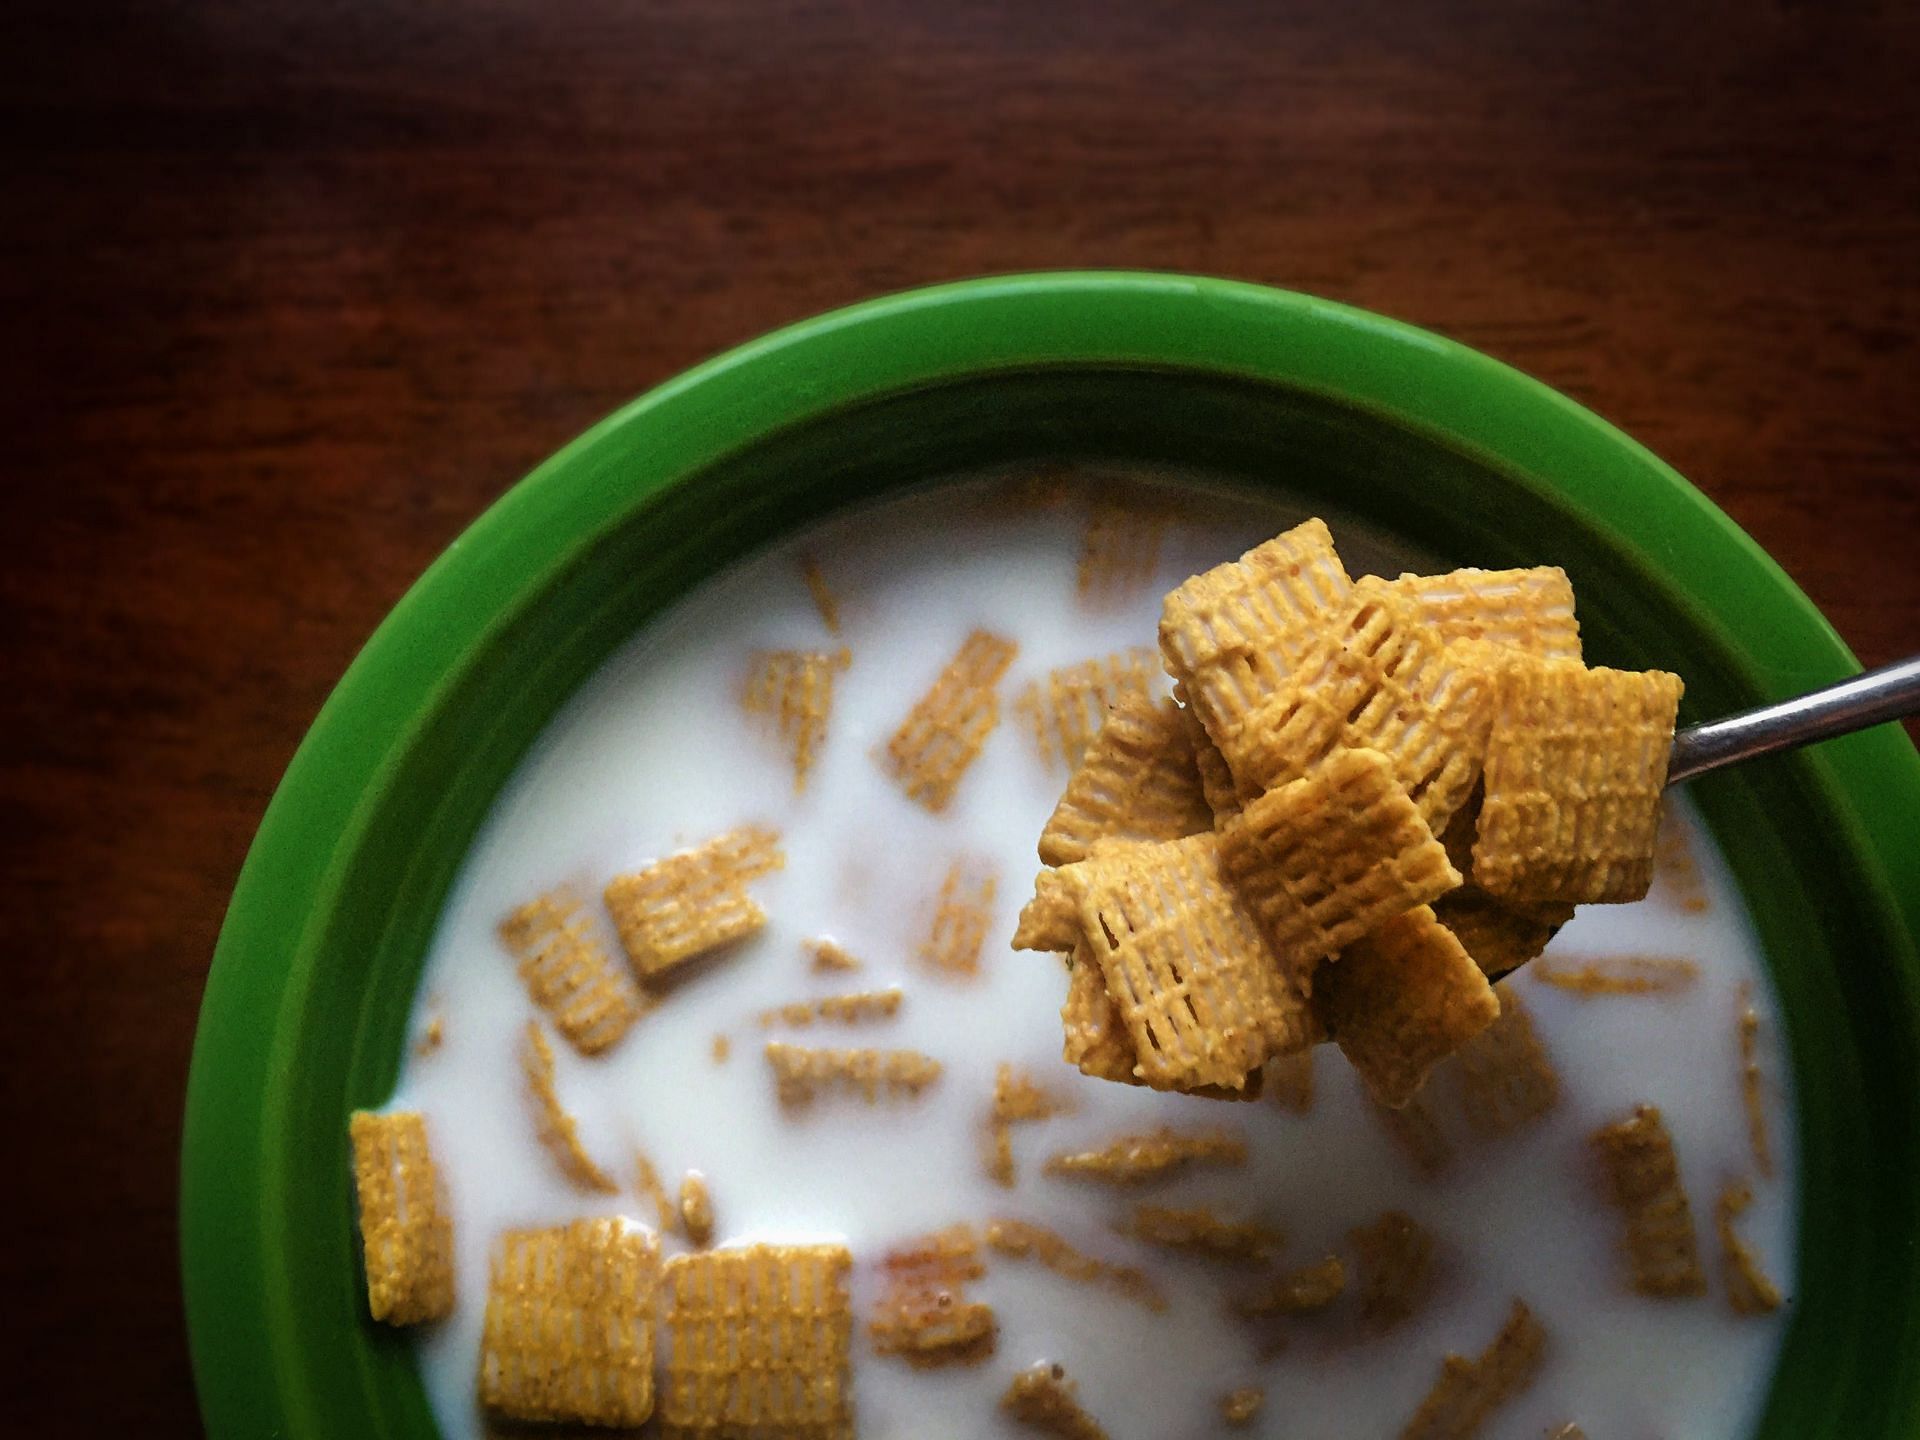 Cereal as a bad carb (image sourced via Pexels / Photo by binyamin)